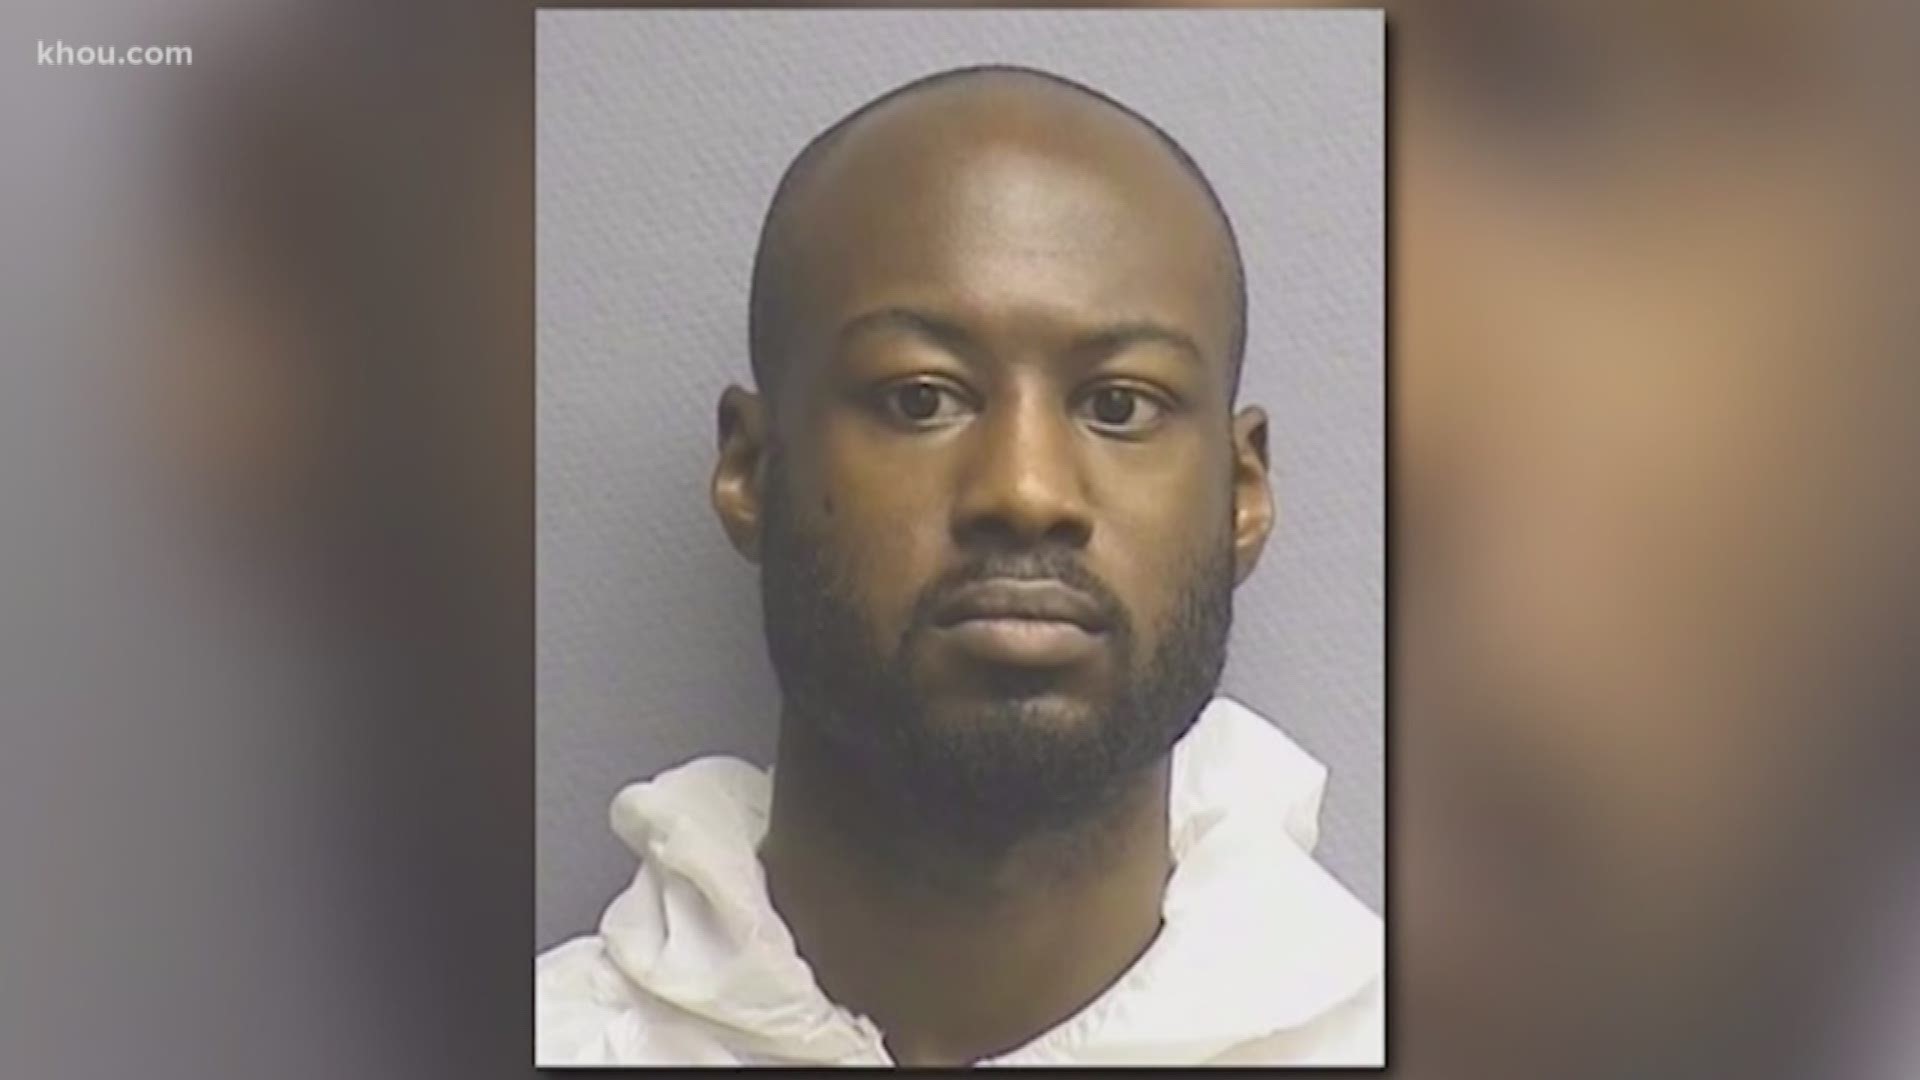 Jackson, 30, had long been considered a suspect by the Houston Police Department.